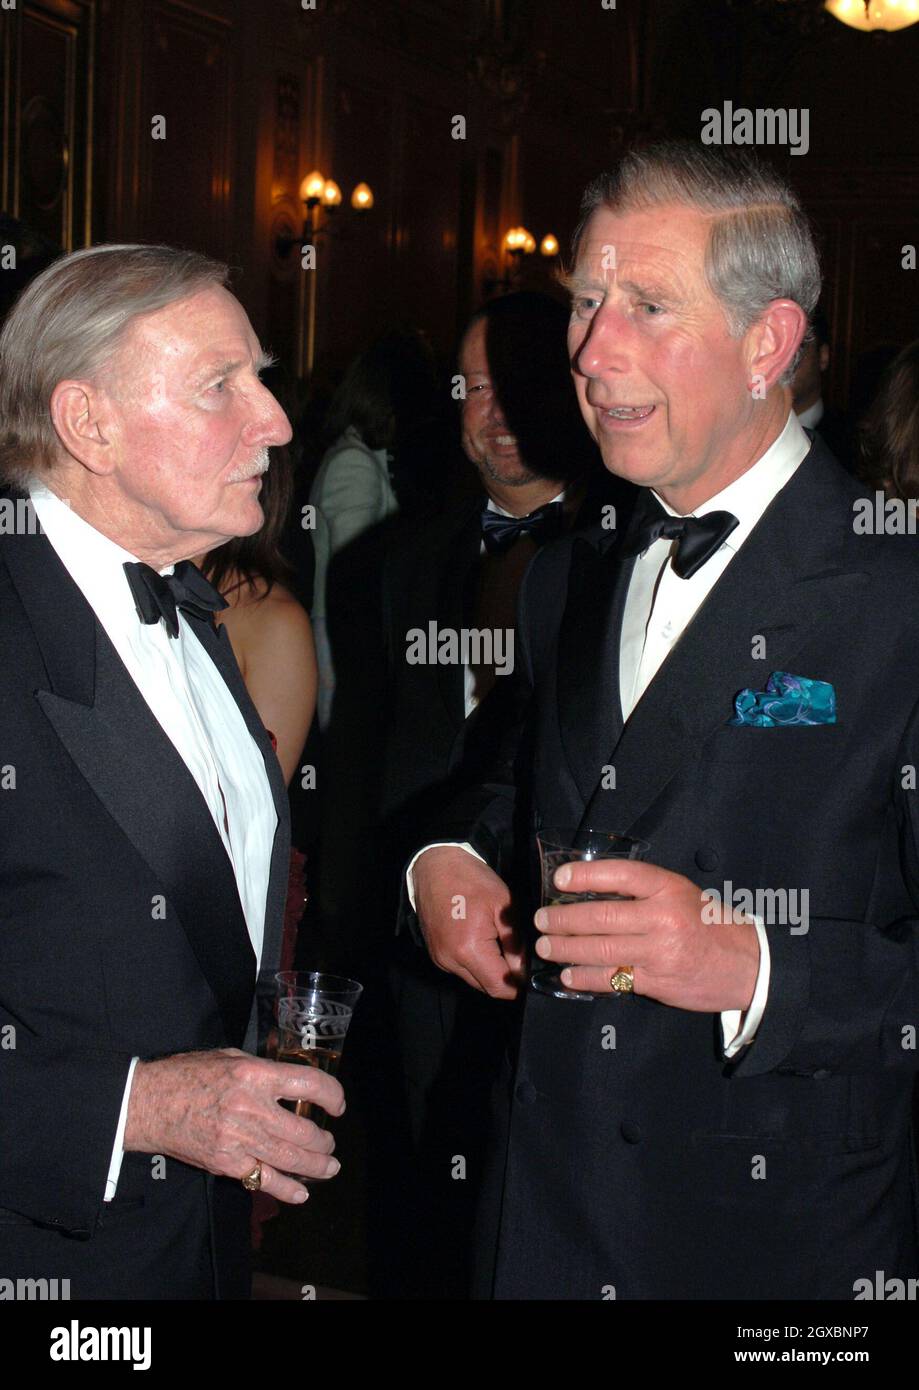 Prince Charles, Prince of Wales, chats to actor Leslie Phillips. Stock Photo